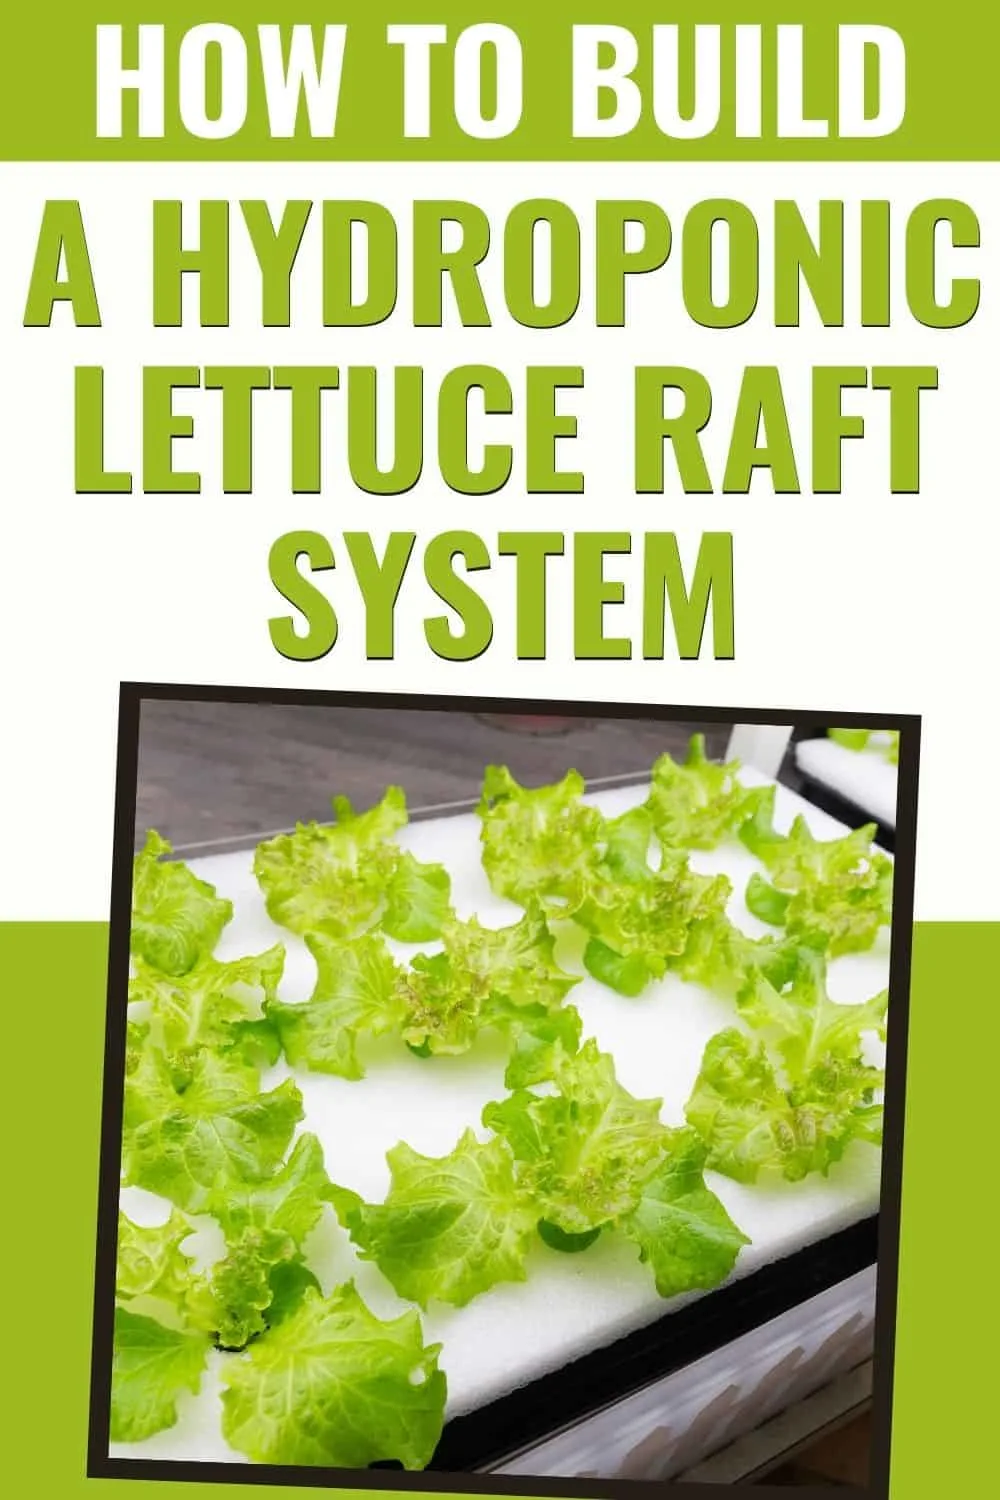 How to build a hydroponic lettuce raft system